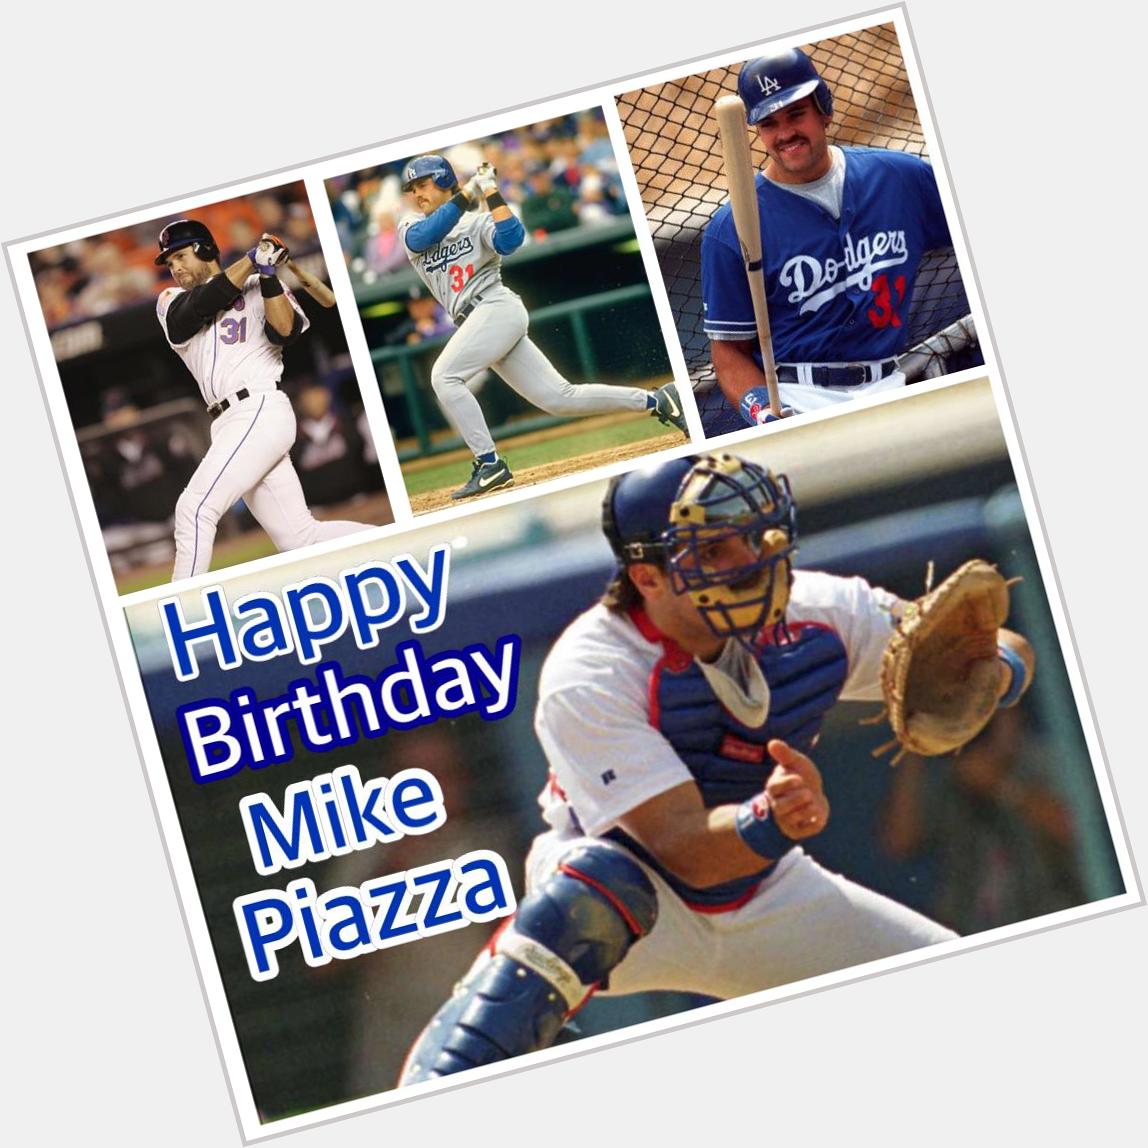 HAPPY BIRTHDAY MIKE PIAZZA!       